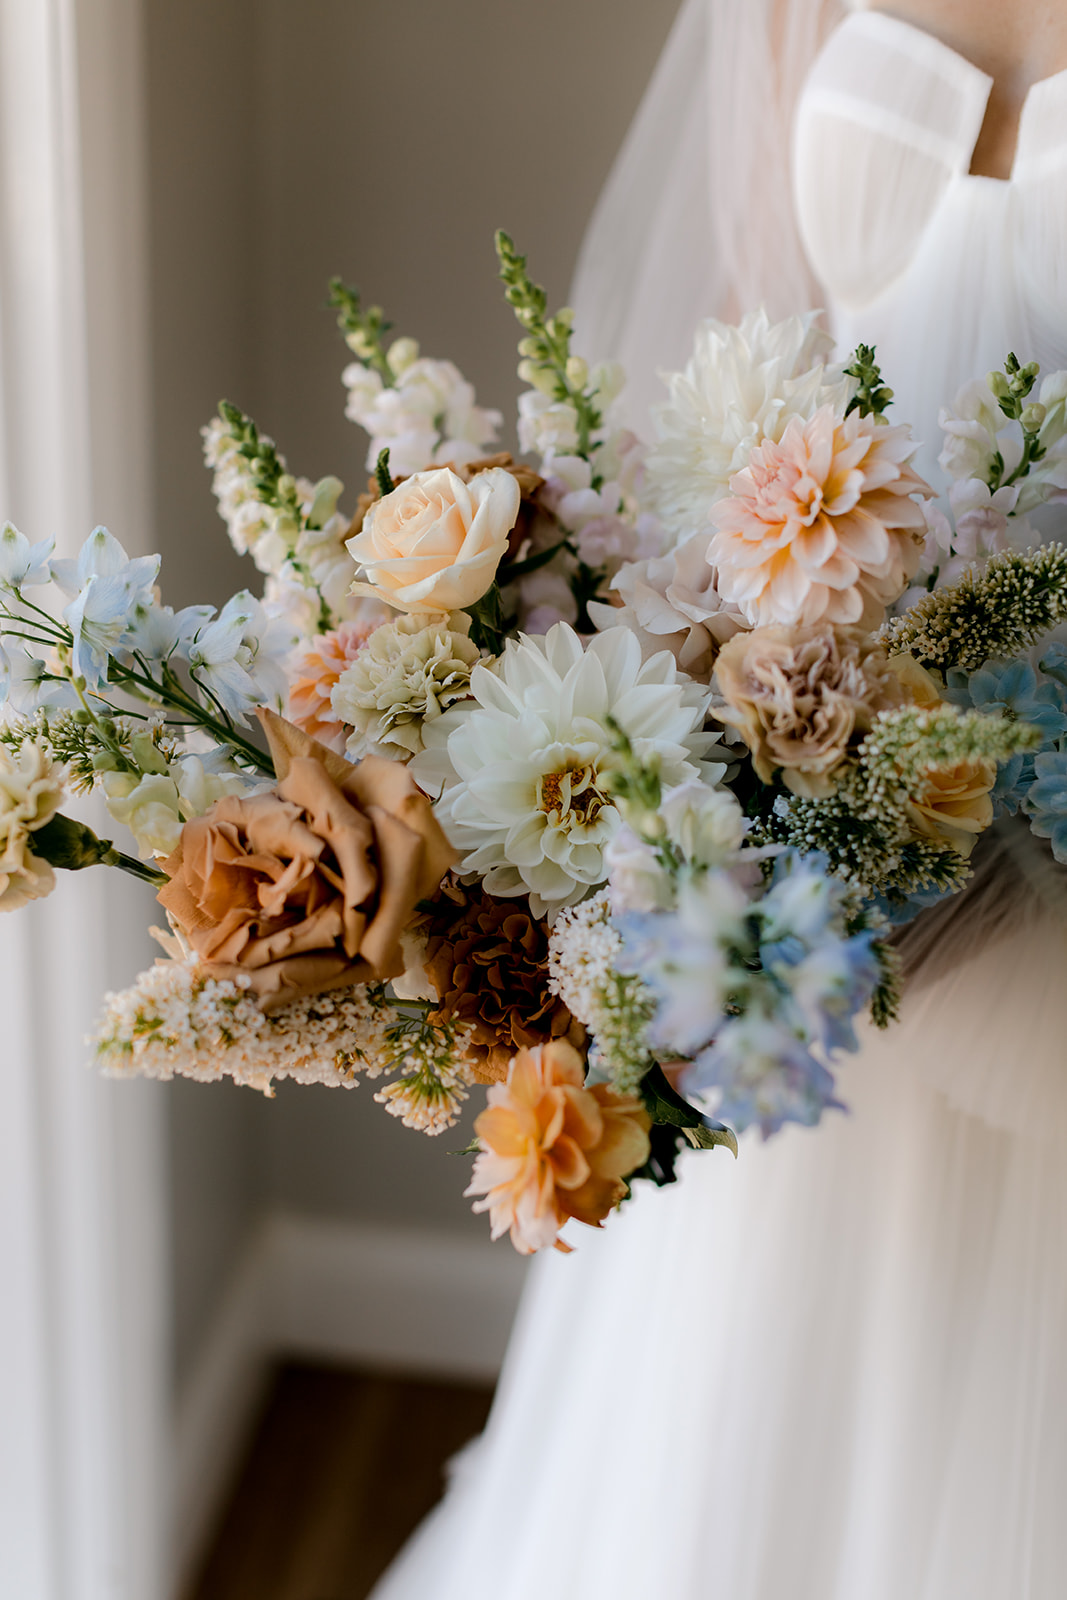 Close-up of chic bridal bouquet for an elegant country wedding.